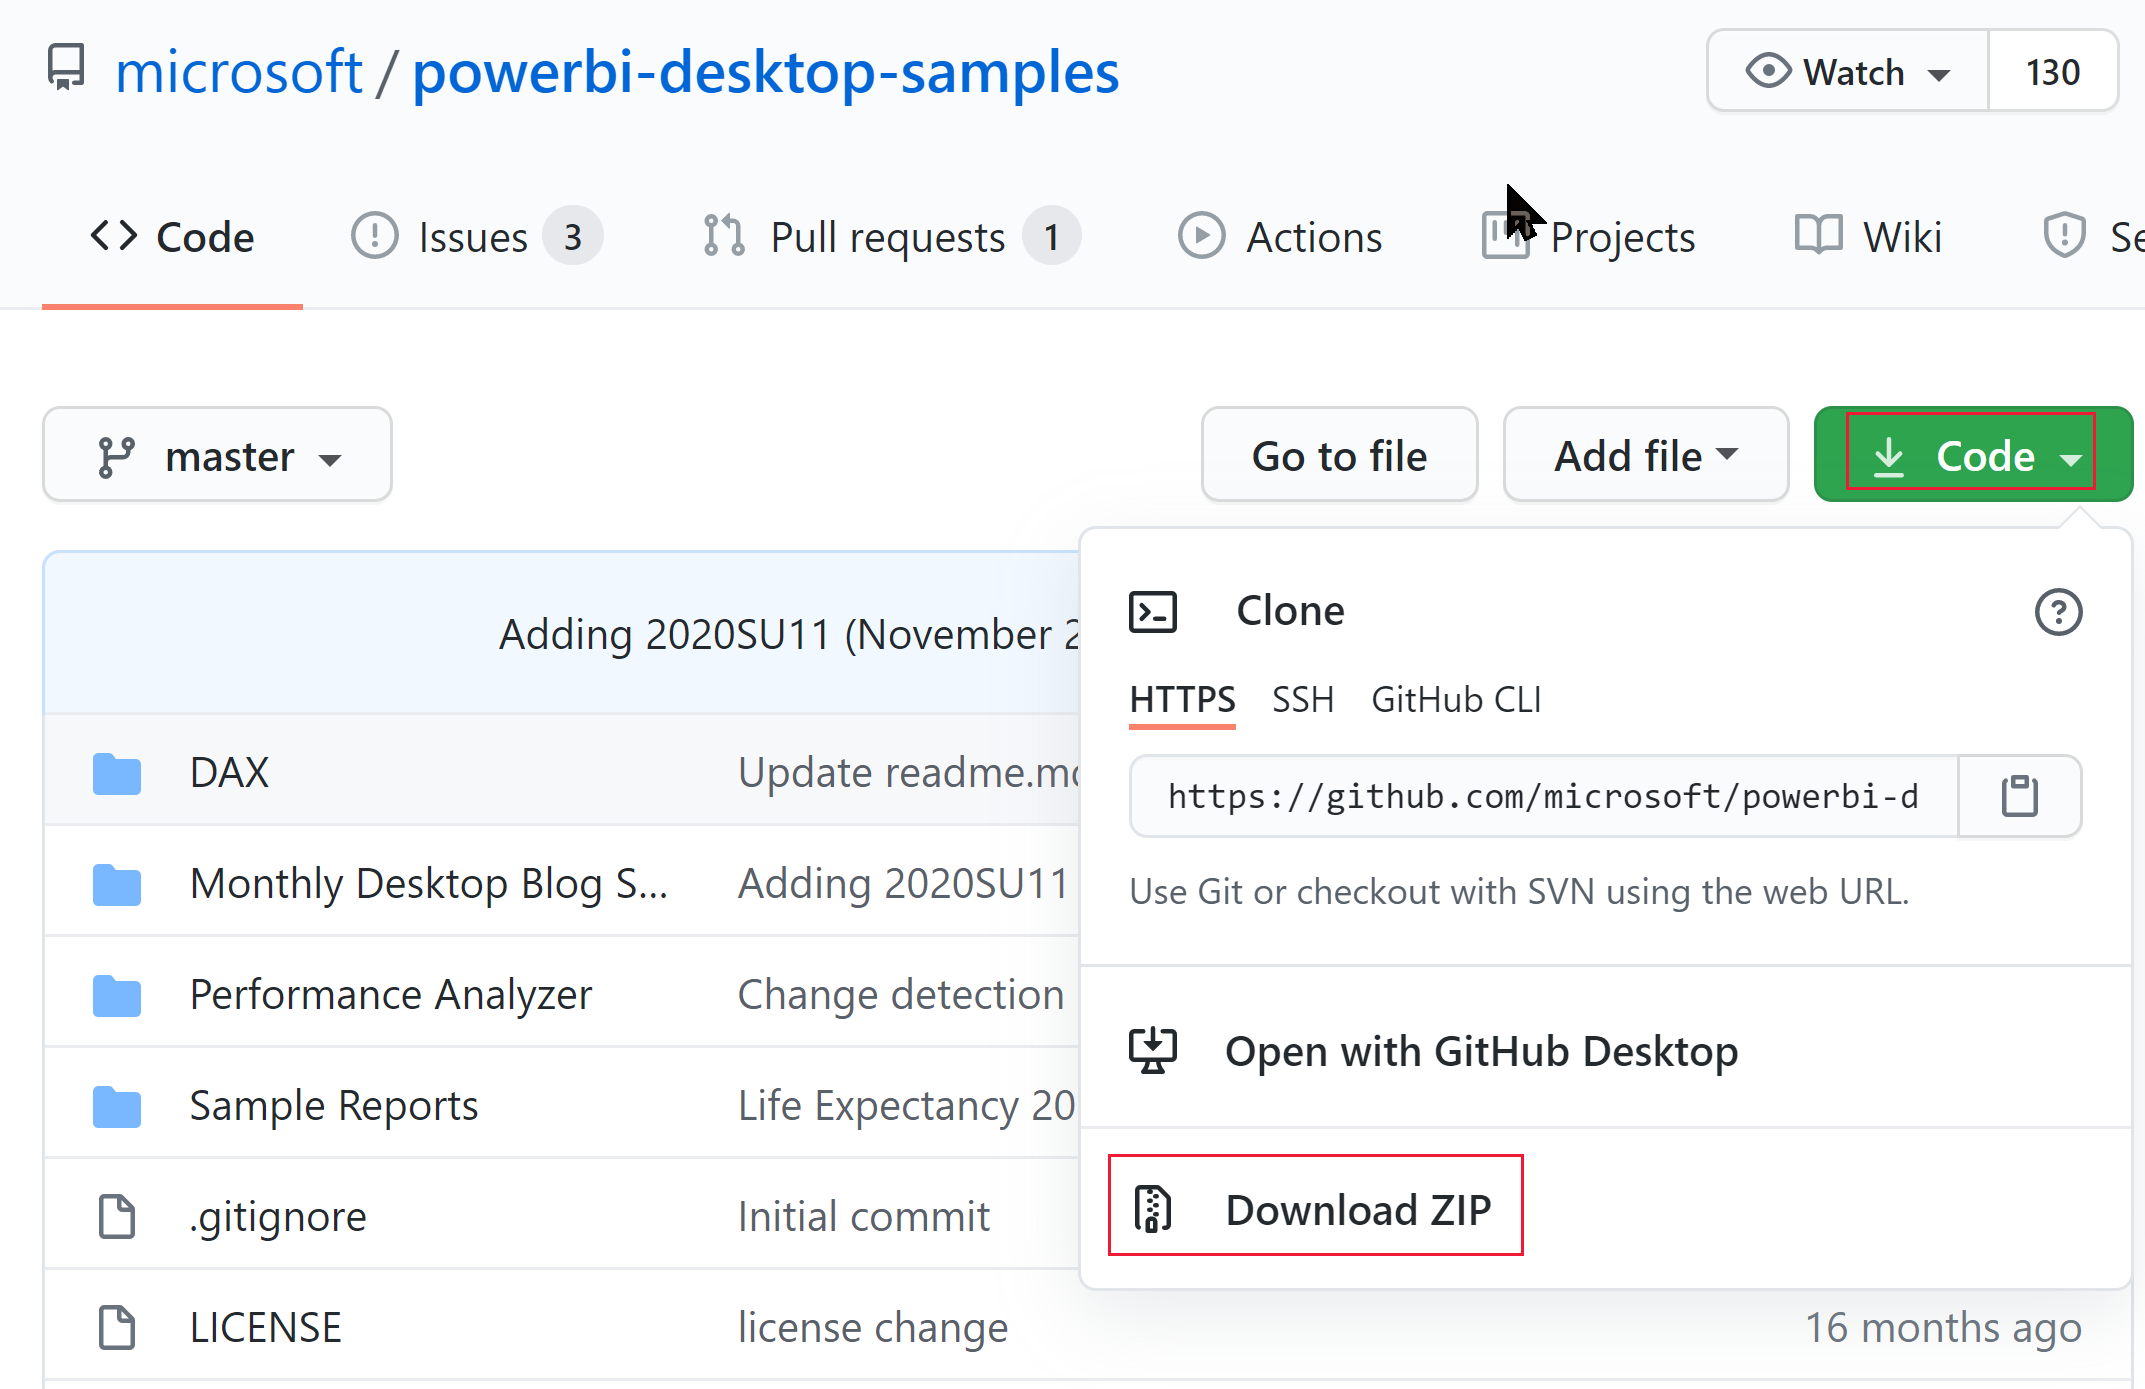 A screenshot showing the ZIP download option in the Power B I desktop samples GitHub